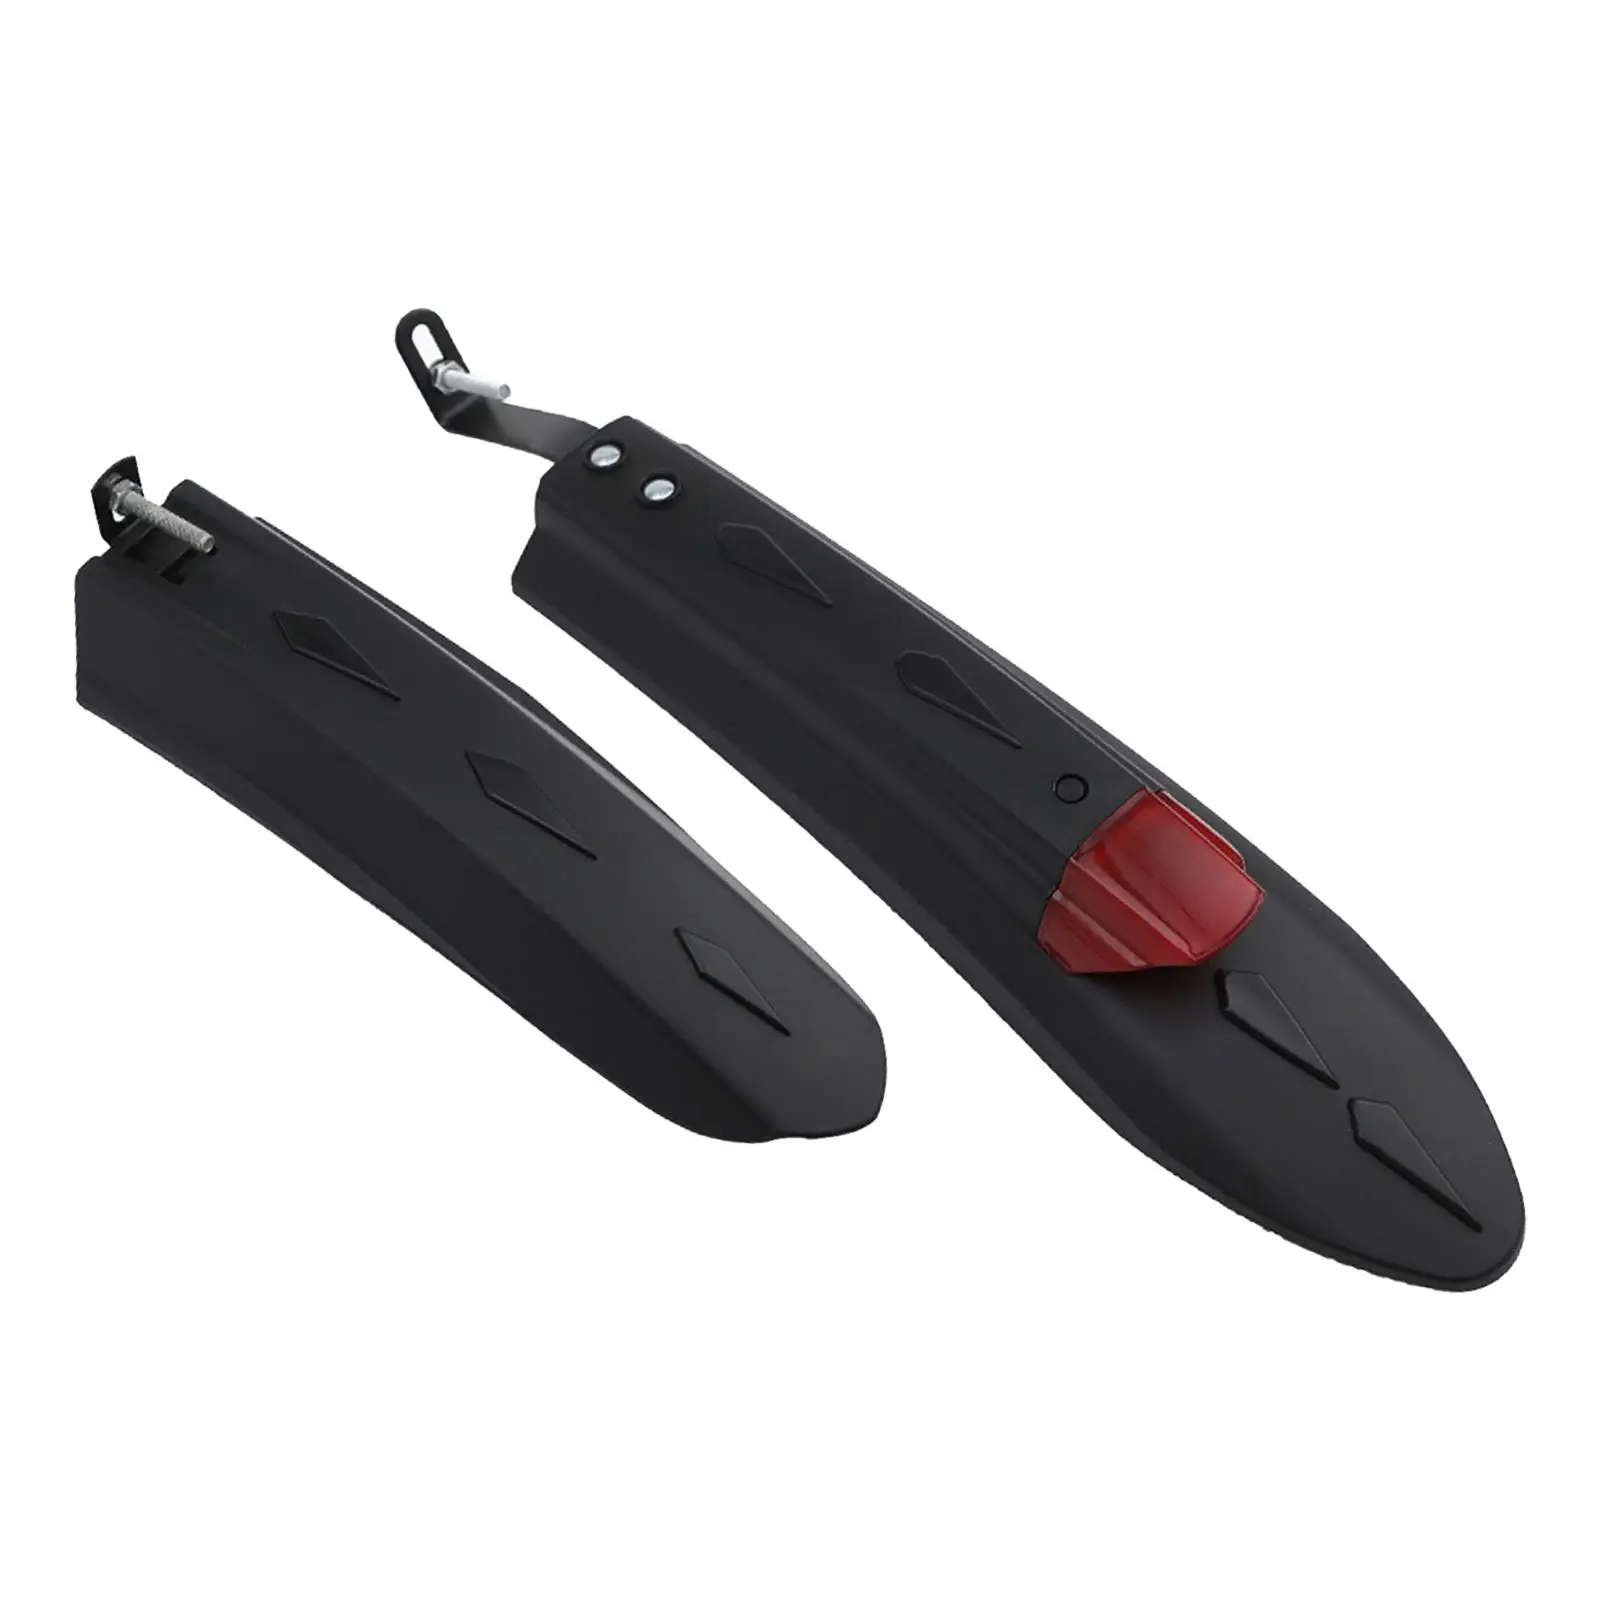 Bike Mudguard Set with Light Easy Installation Glow Bike Fenders Front Rear Set for Cycling Road Bike Sports Accessories